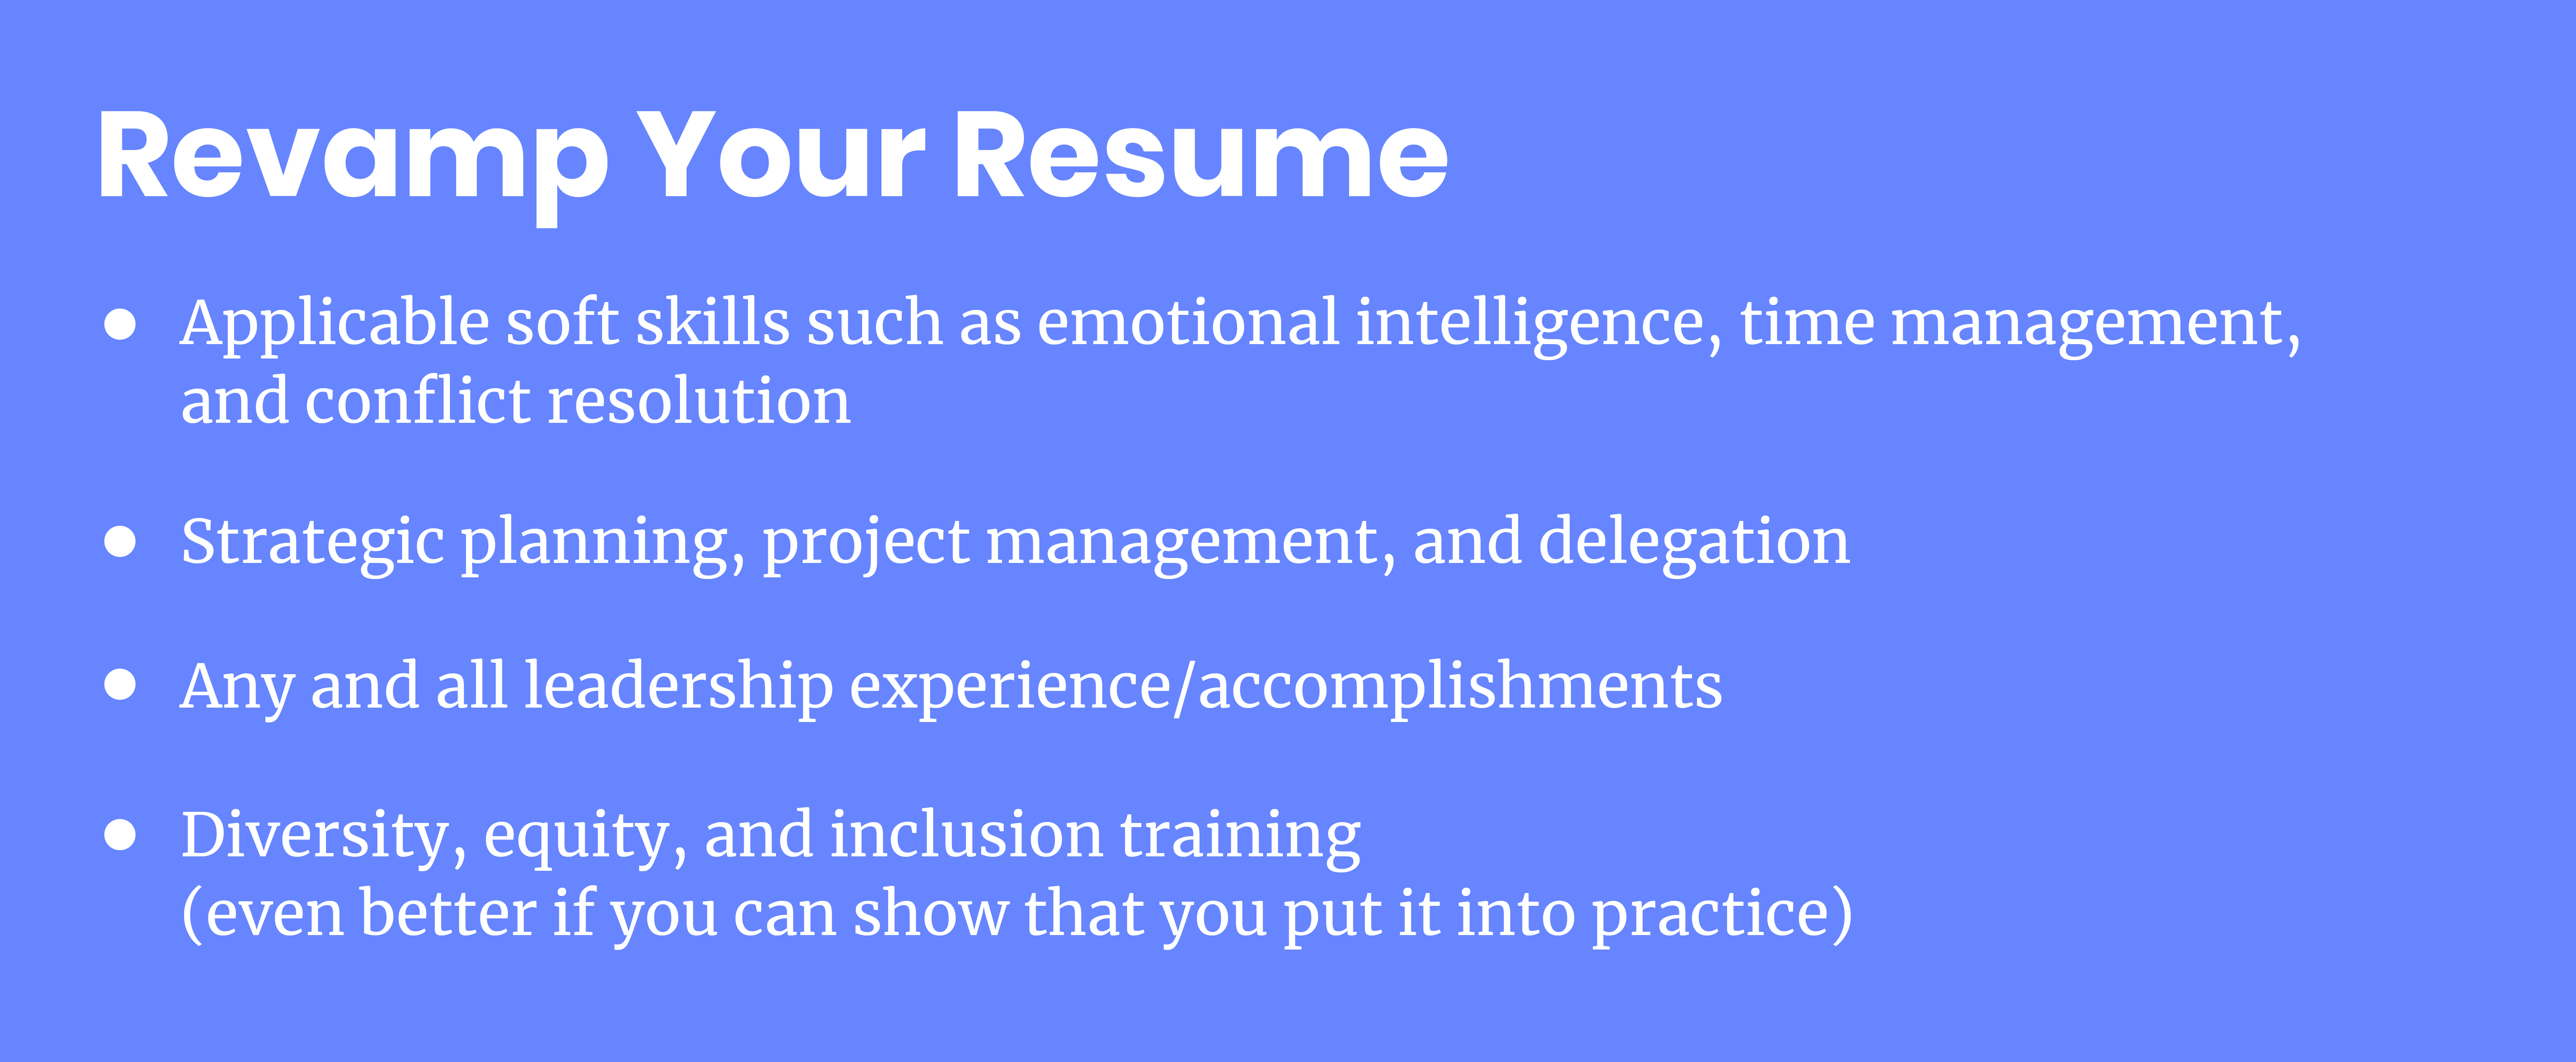 revamp your resume 